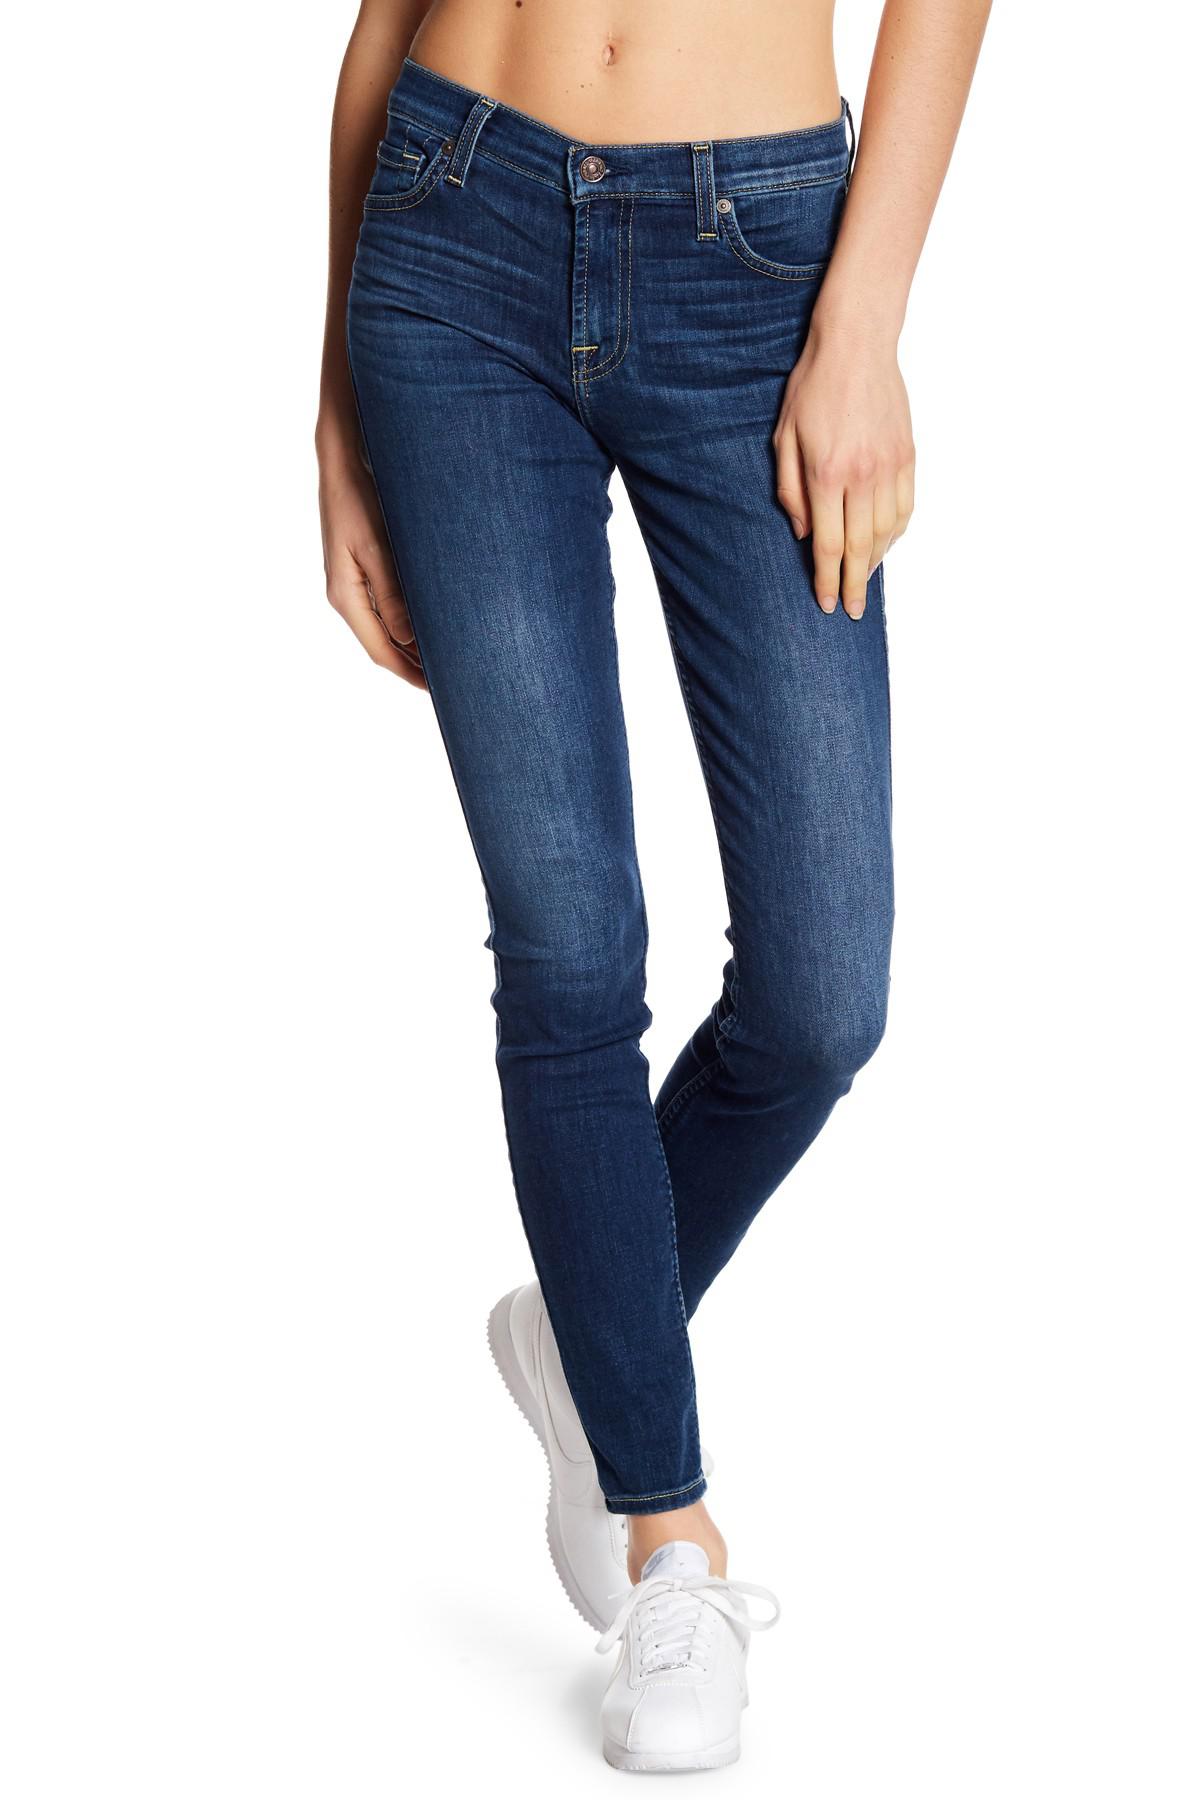 Lyst - 7 For All Mankind Gwenevere Skinny Jeans in Blue